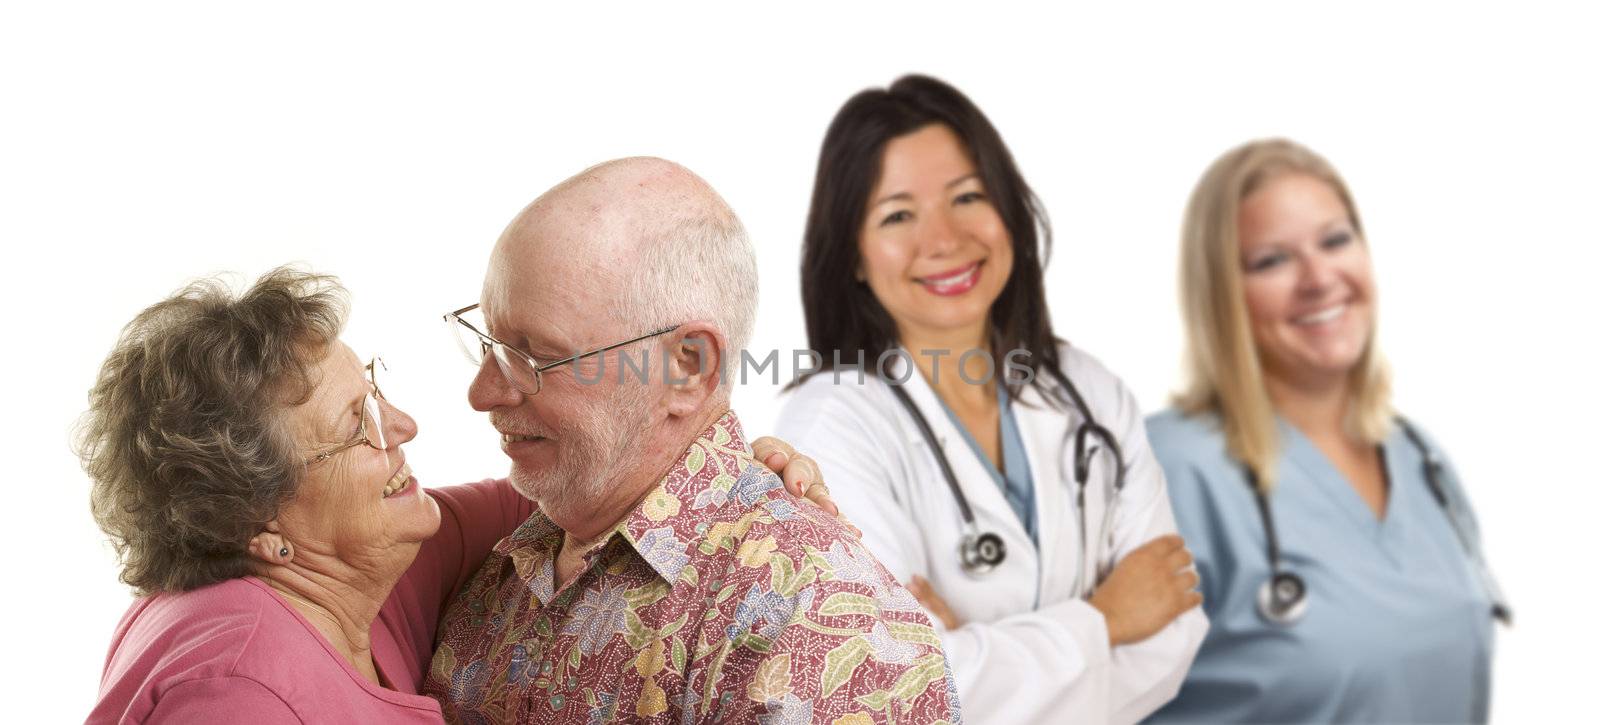 Happy Loving Senior Couple with Smiling Medical Doctors or Nurses Behind Isolated on a White Background.